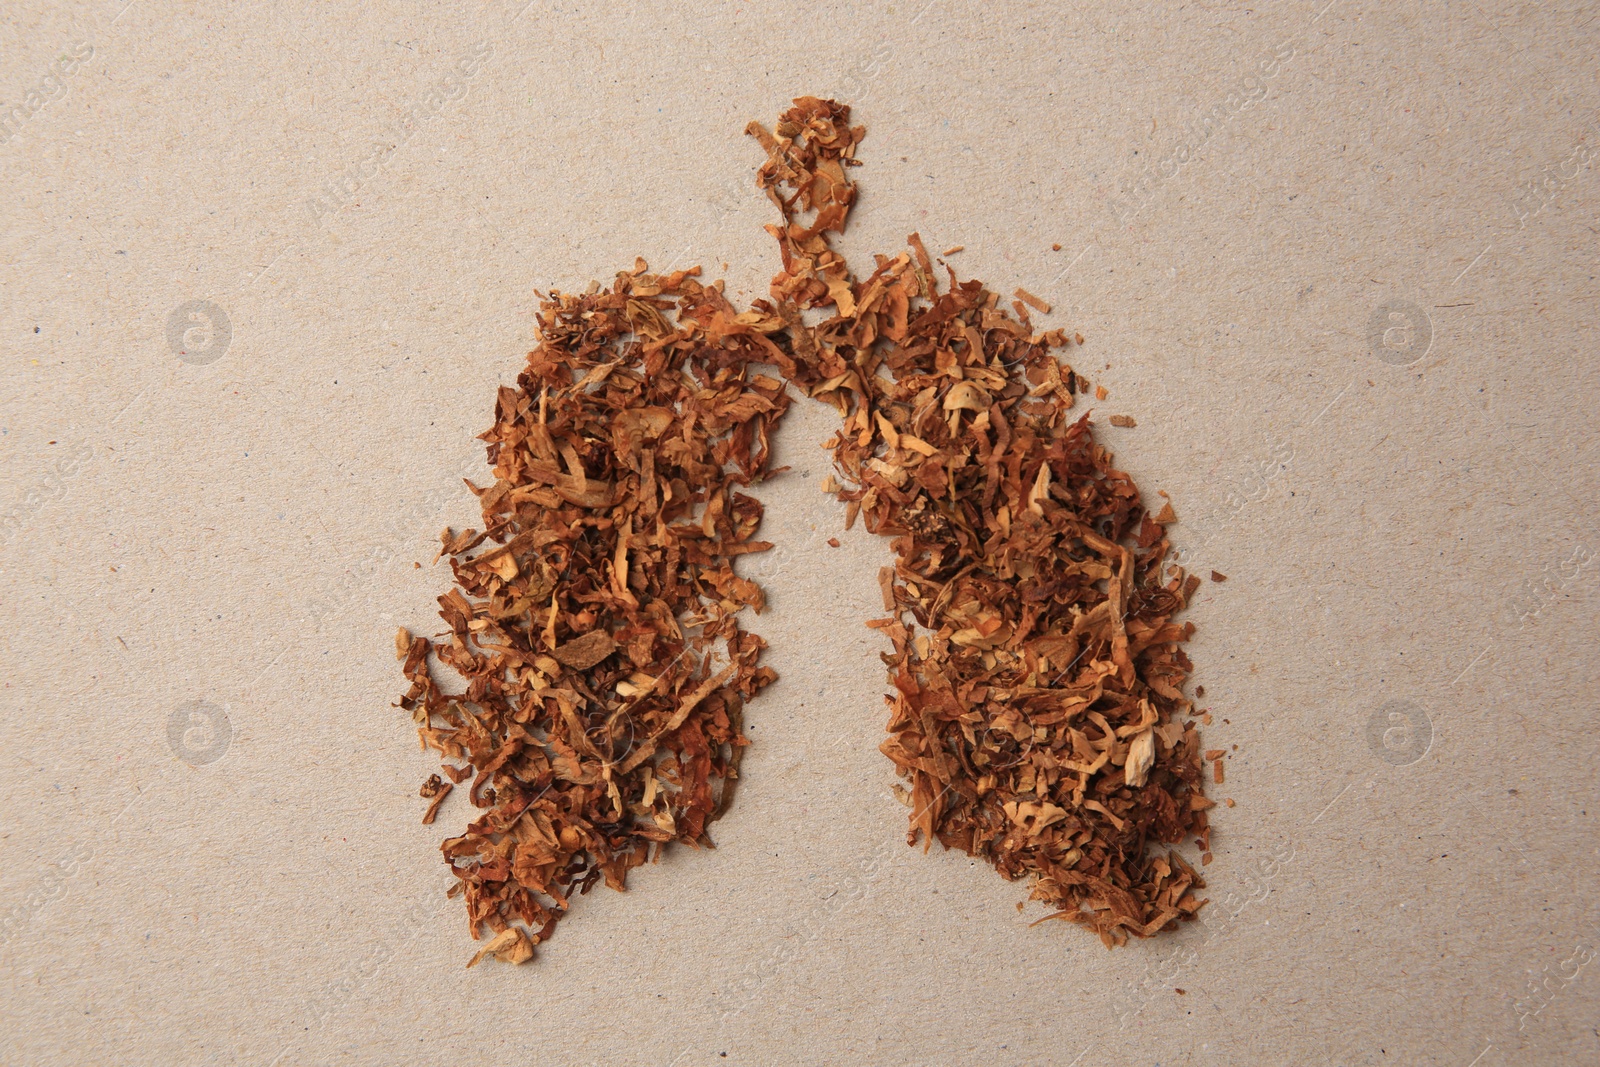 Photo of Human lungs made of tobacco on paper, top view. No smoking concept